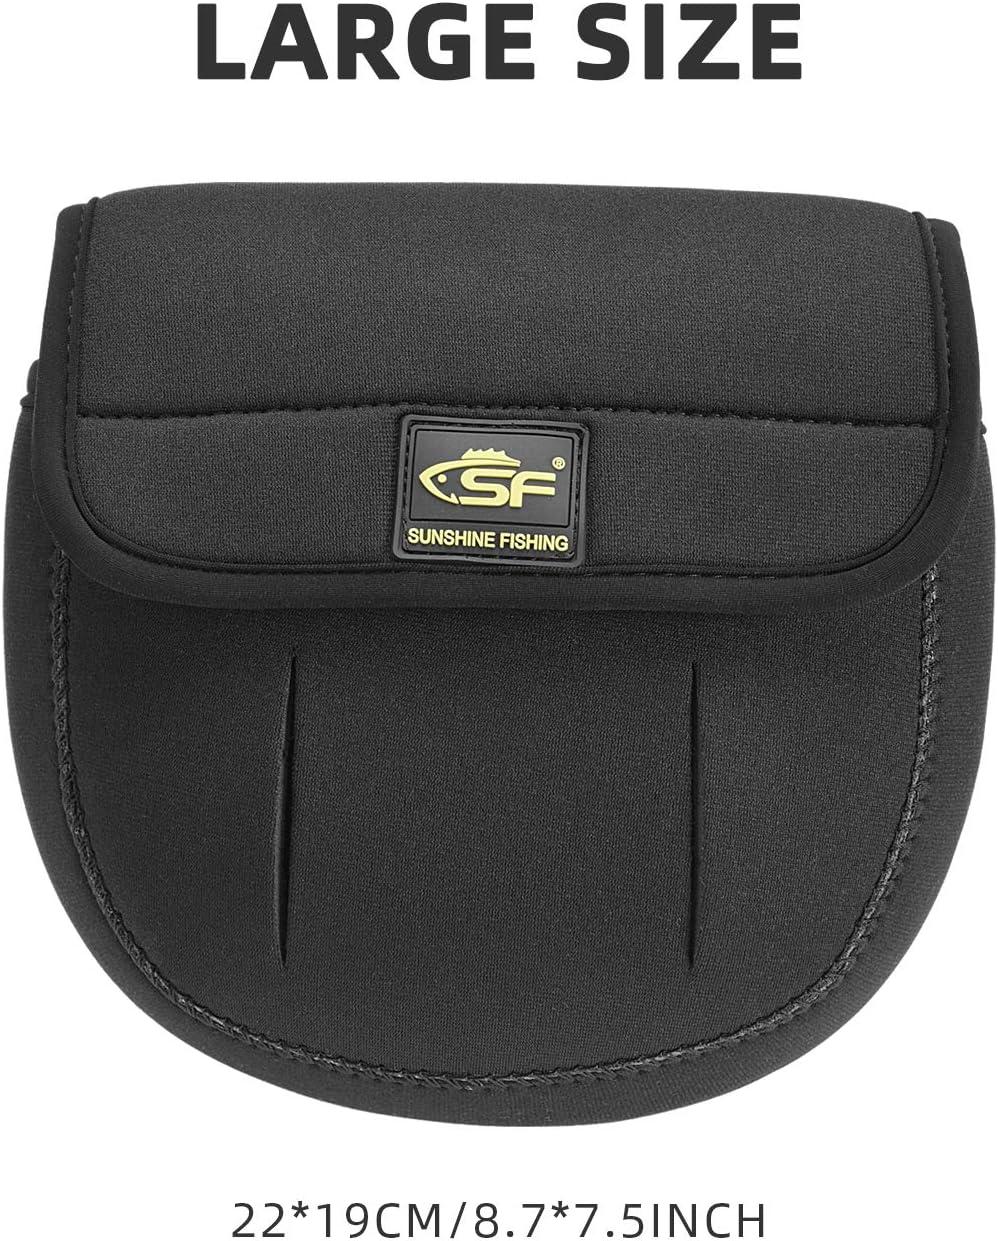 SF Spinning Reel Cover Case Bag Pouch Glove Fits 1000 2000 3000 4000 5000  6000 Series Spinning Reels Black-1Pcs UP to 3000 Reels